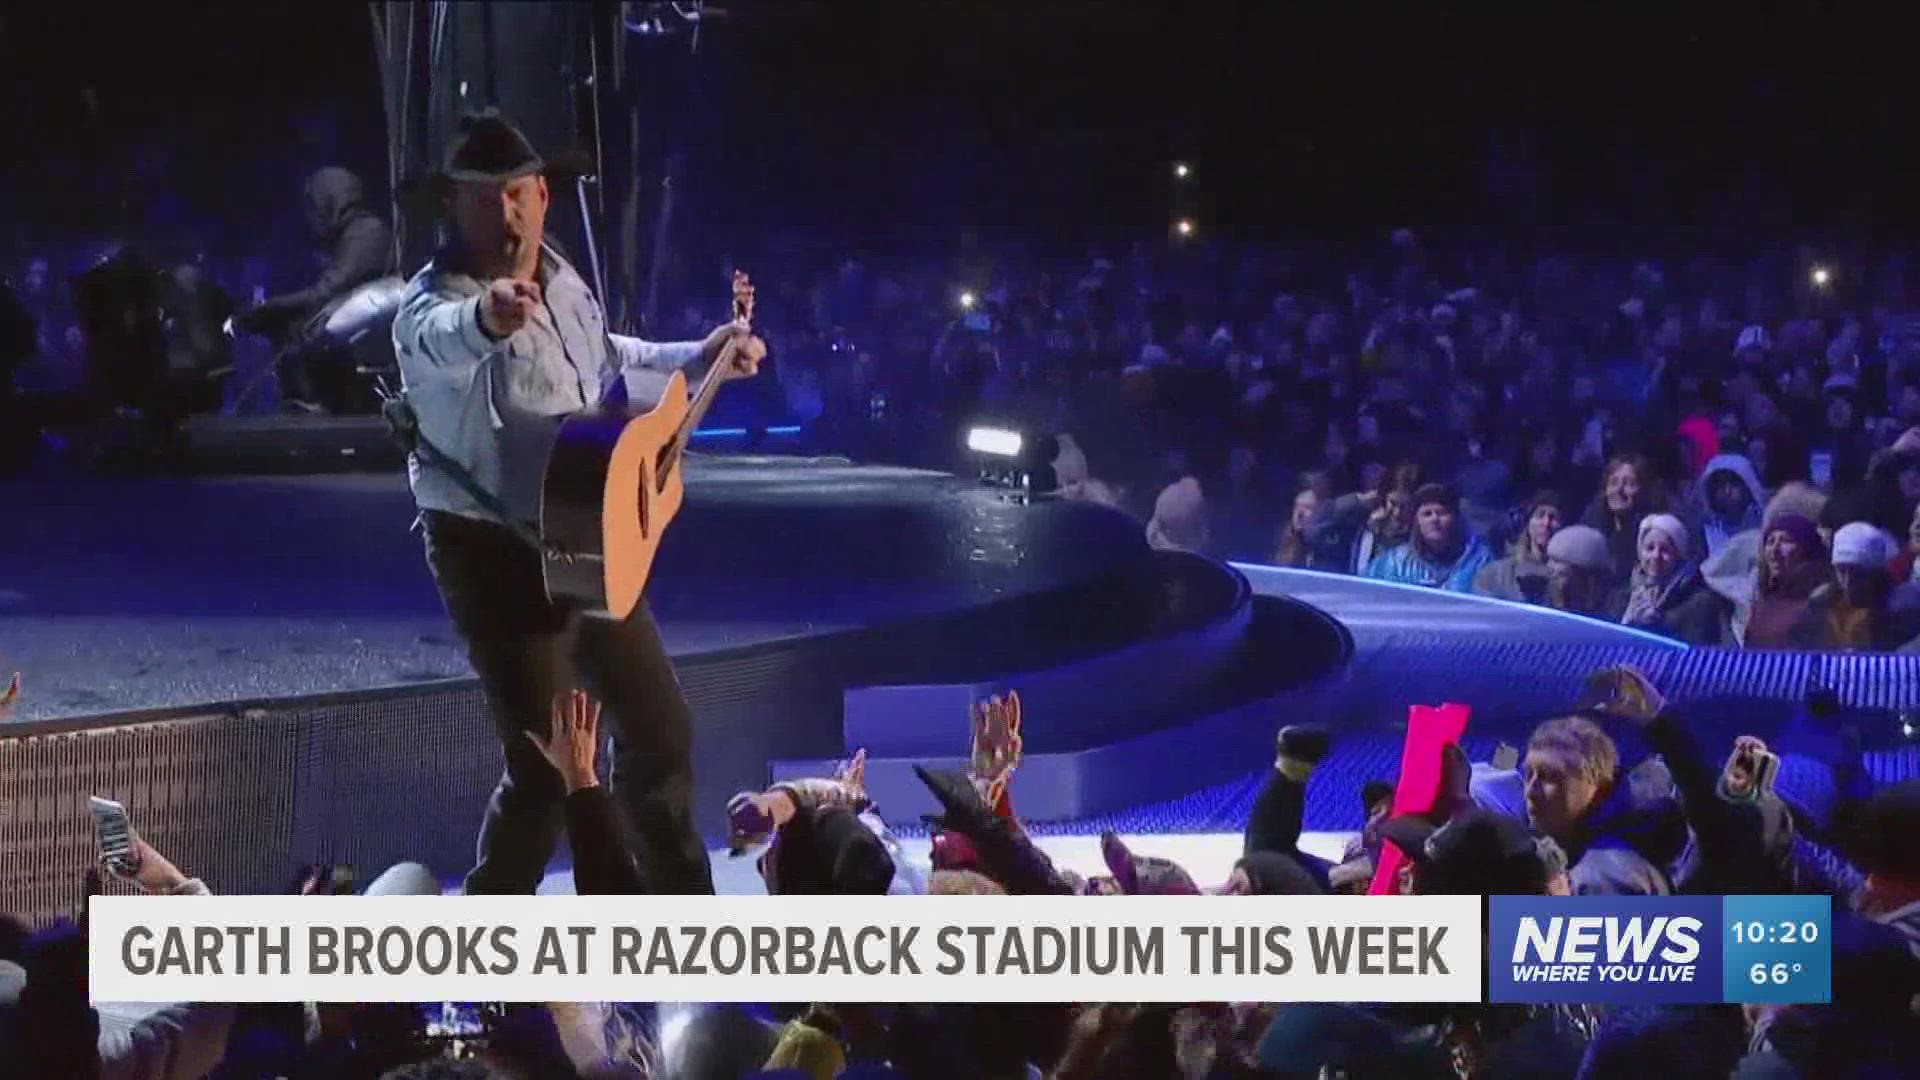 Before Garth Brooks hits the stage in Razorback Stadium this weekend, here are a few things you need to know before the concert.